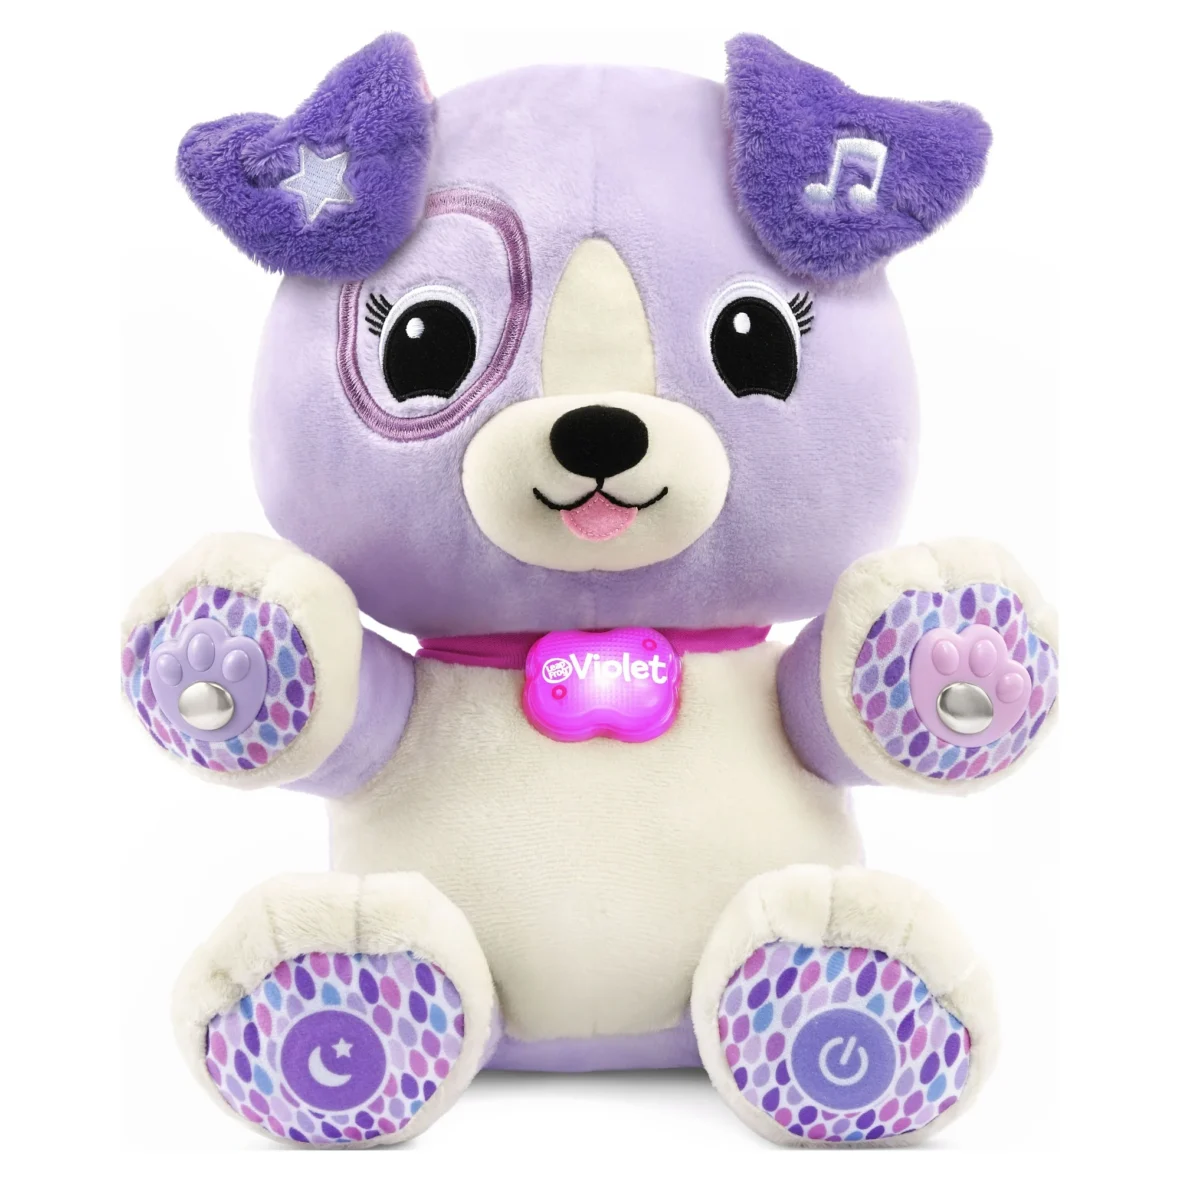 LeapFrog My Pal Violet Smarty Paws Customizable Puppy for Infants, Teaches Words, Mindfulness